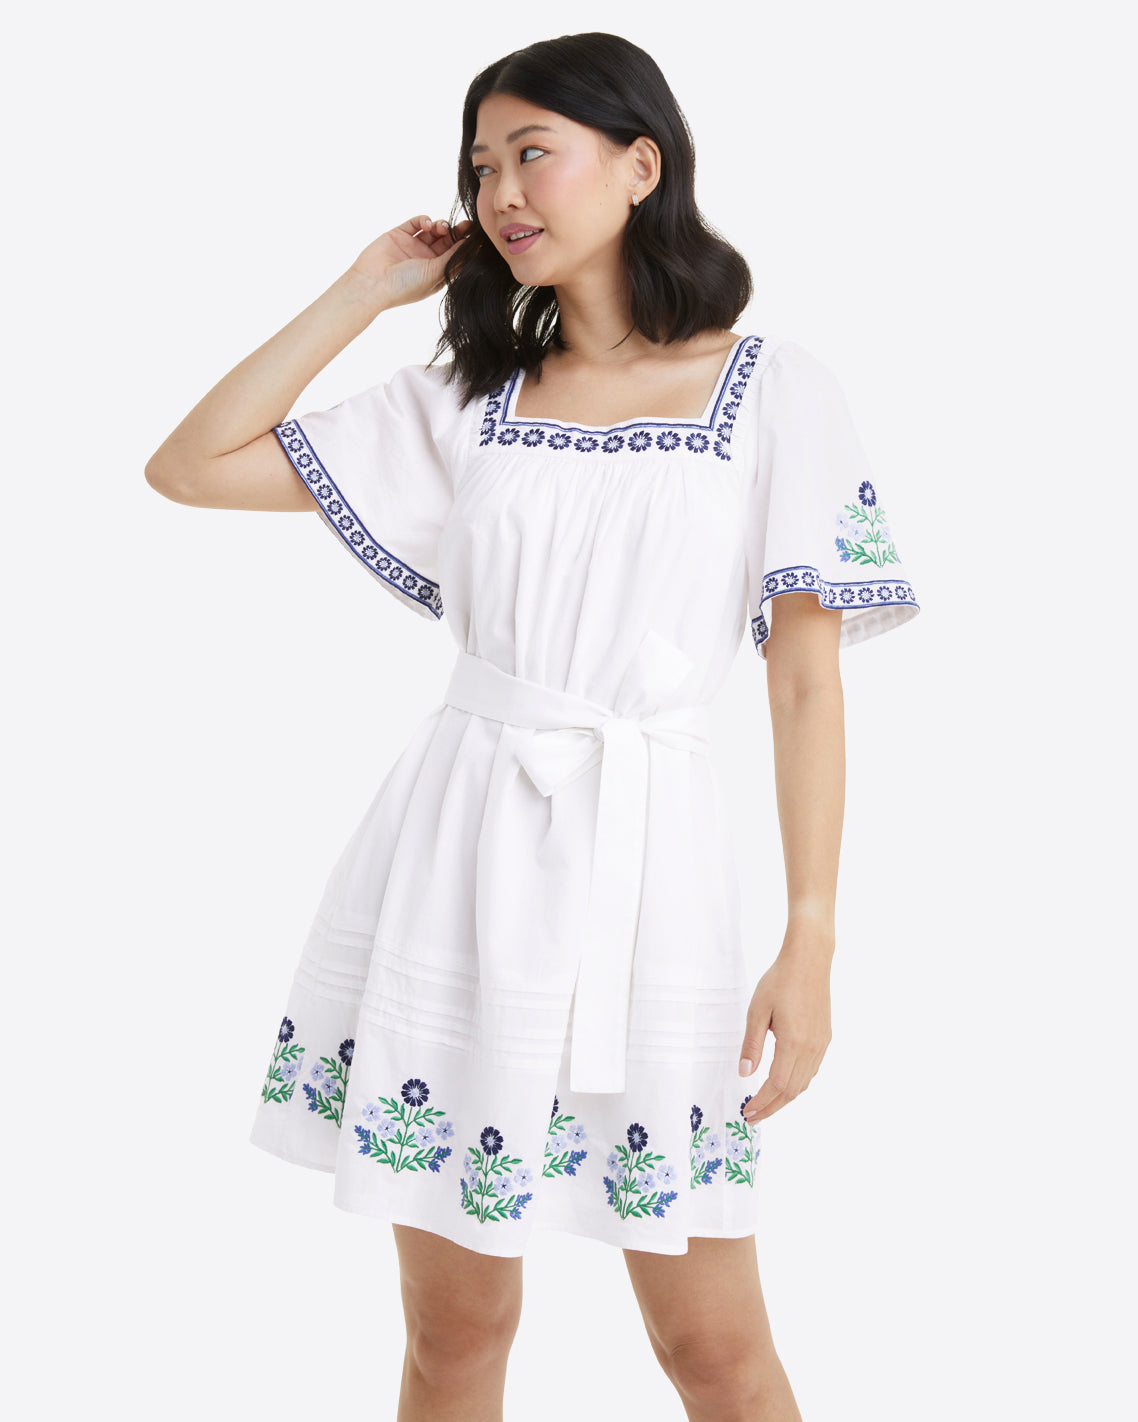 Maren Mini Dress in Floral Embroidery